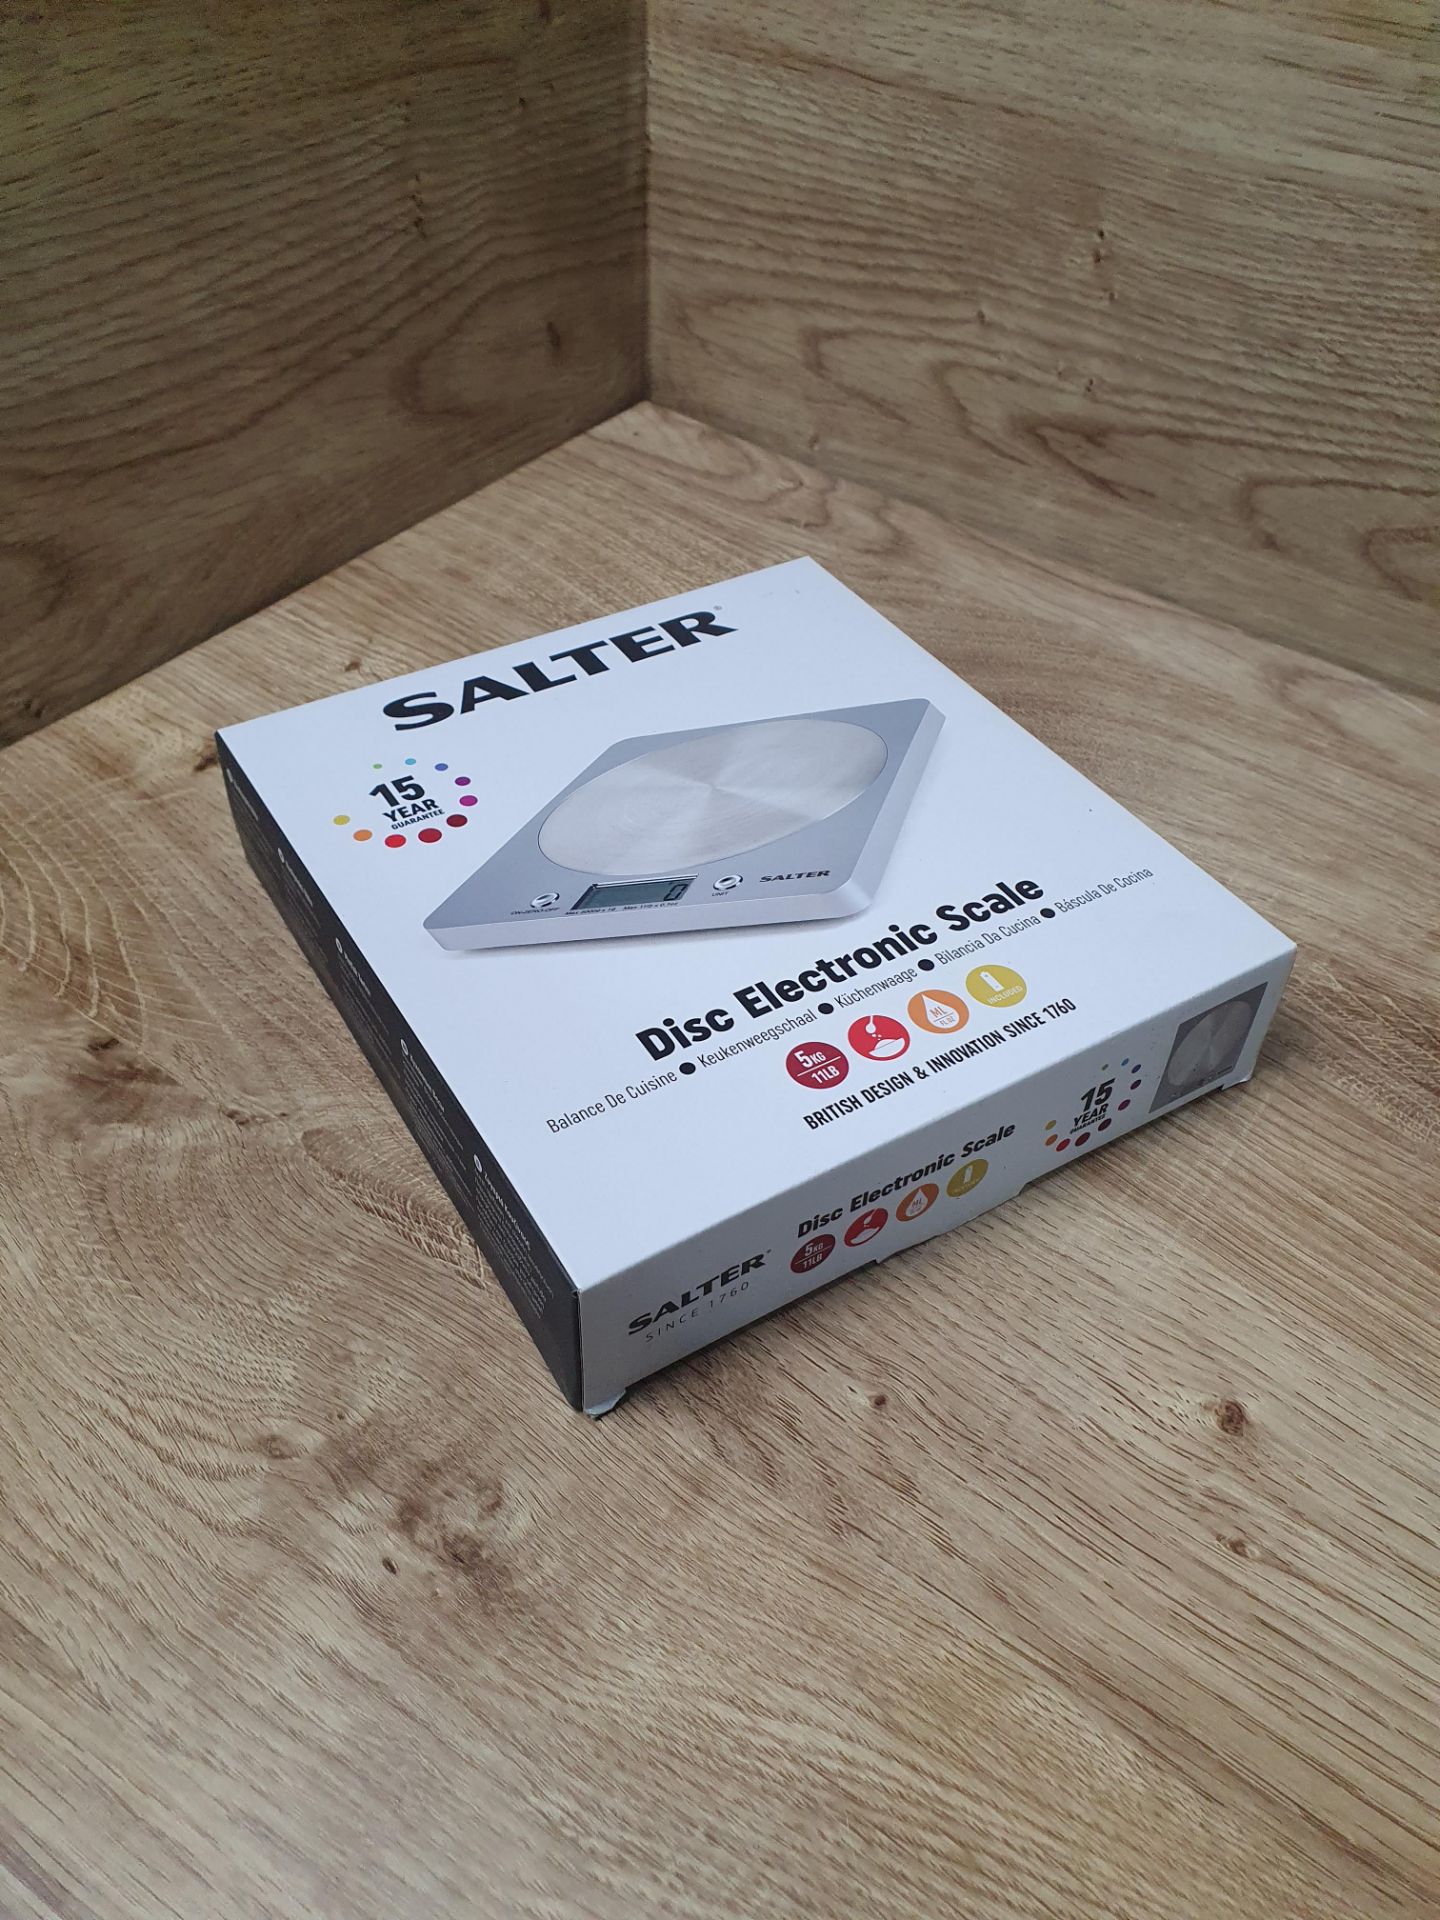 * Salter disc electronic kitchen scales